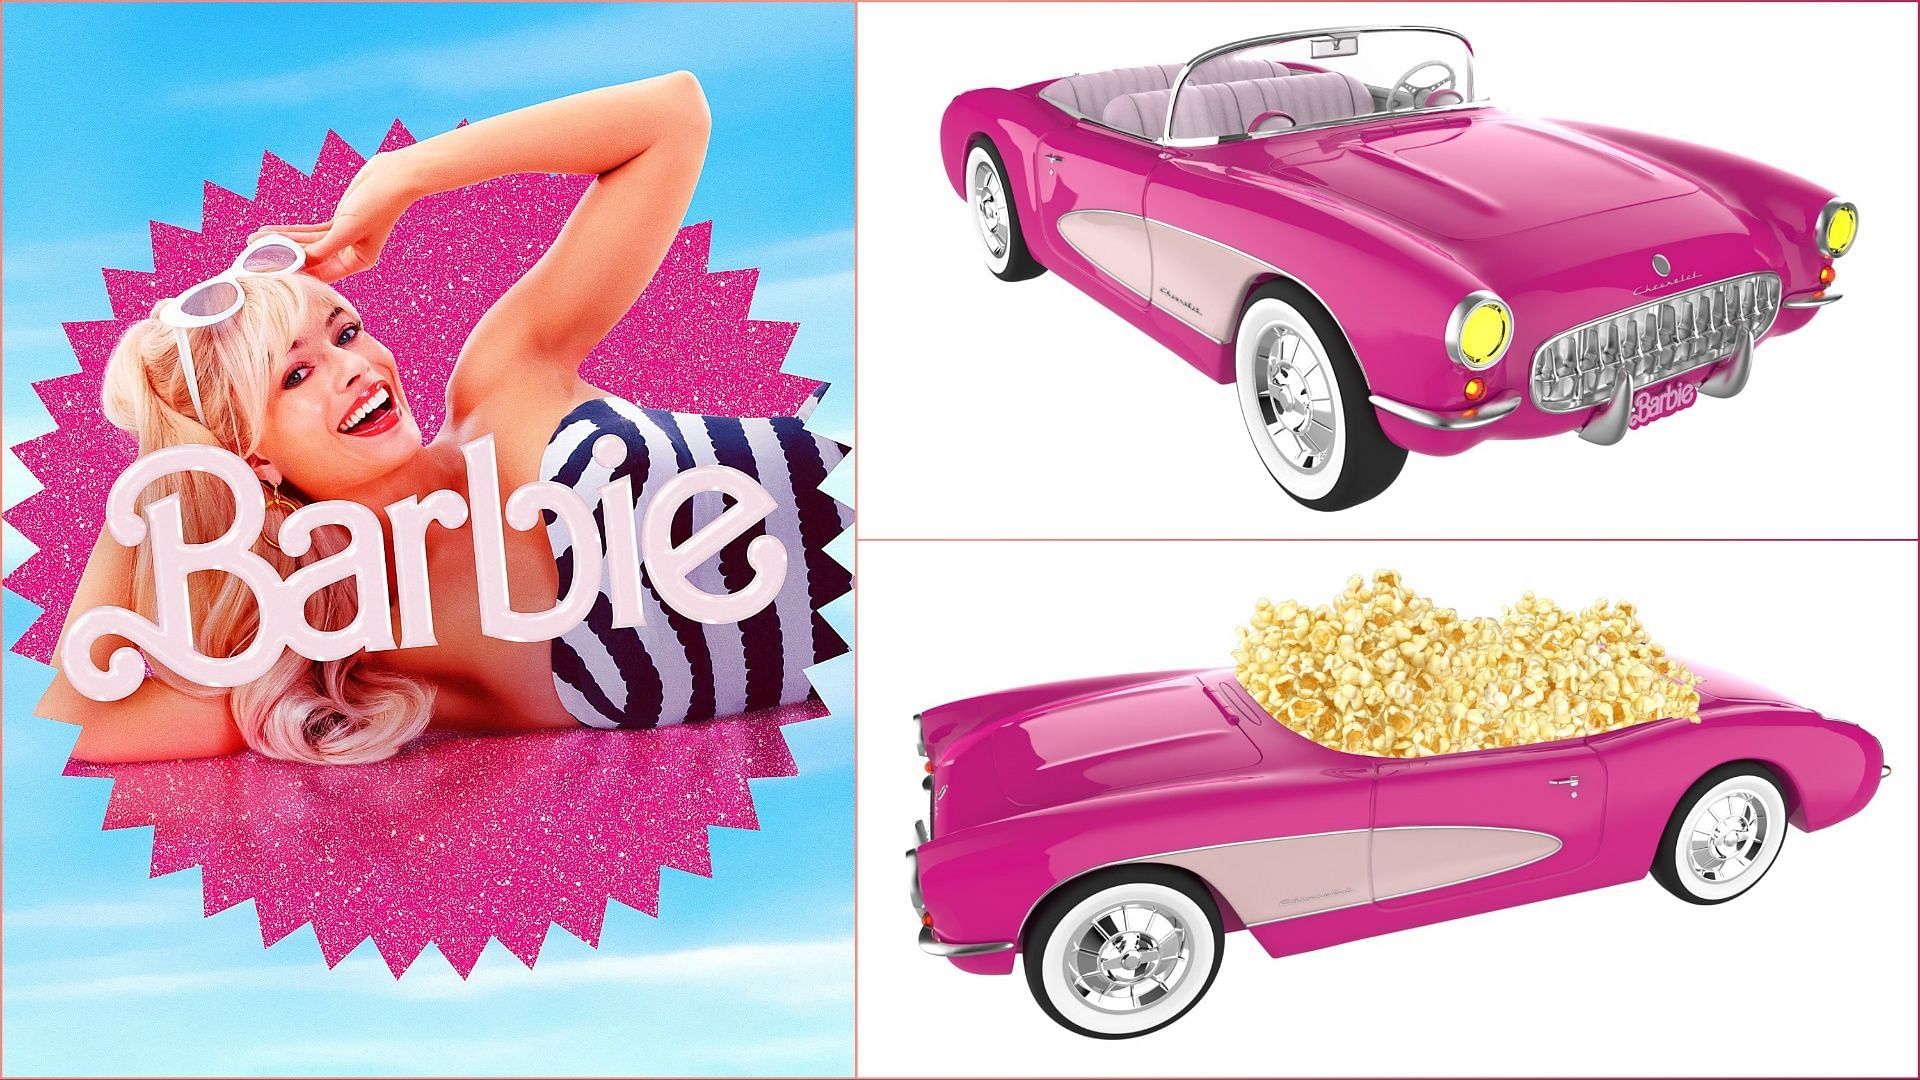 AMC Theatres and Barbie join hands for the launch of new collectibles including Barbie